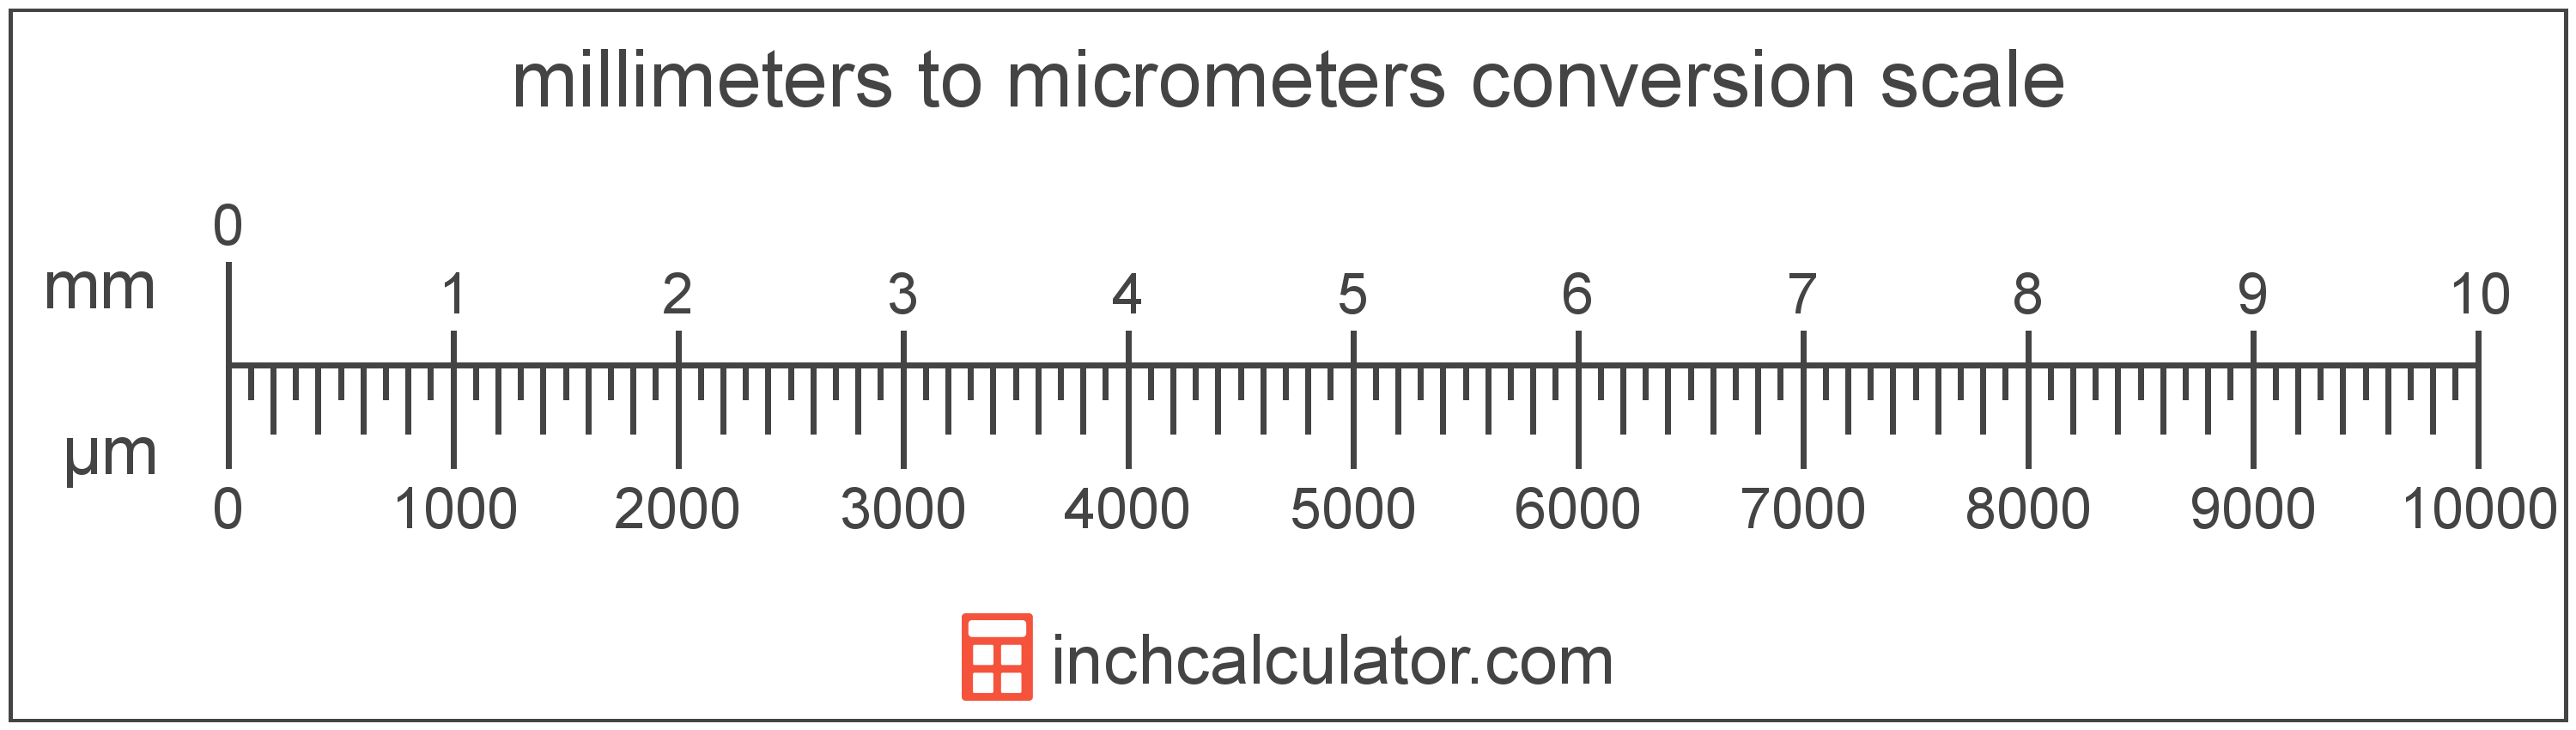 Micrometers to Millimeters Conversion (µm to mm)